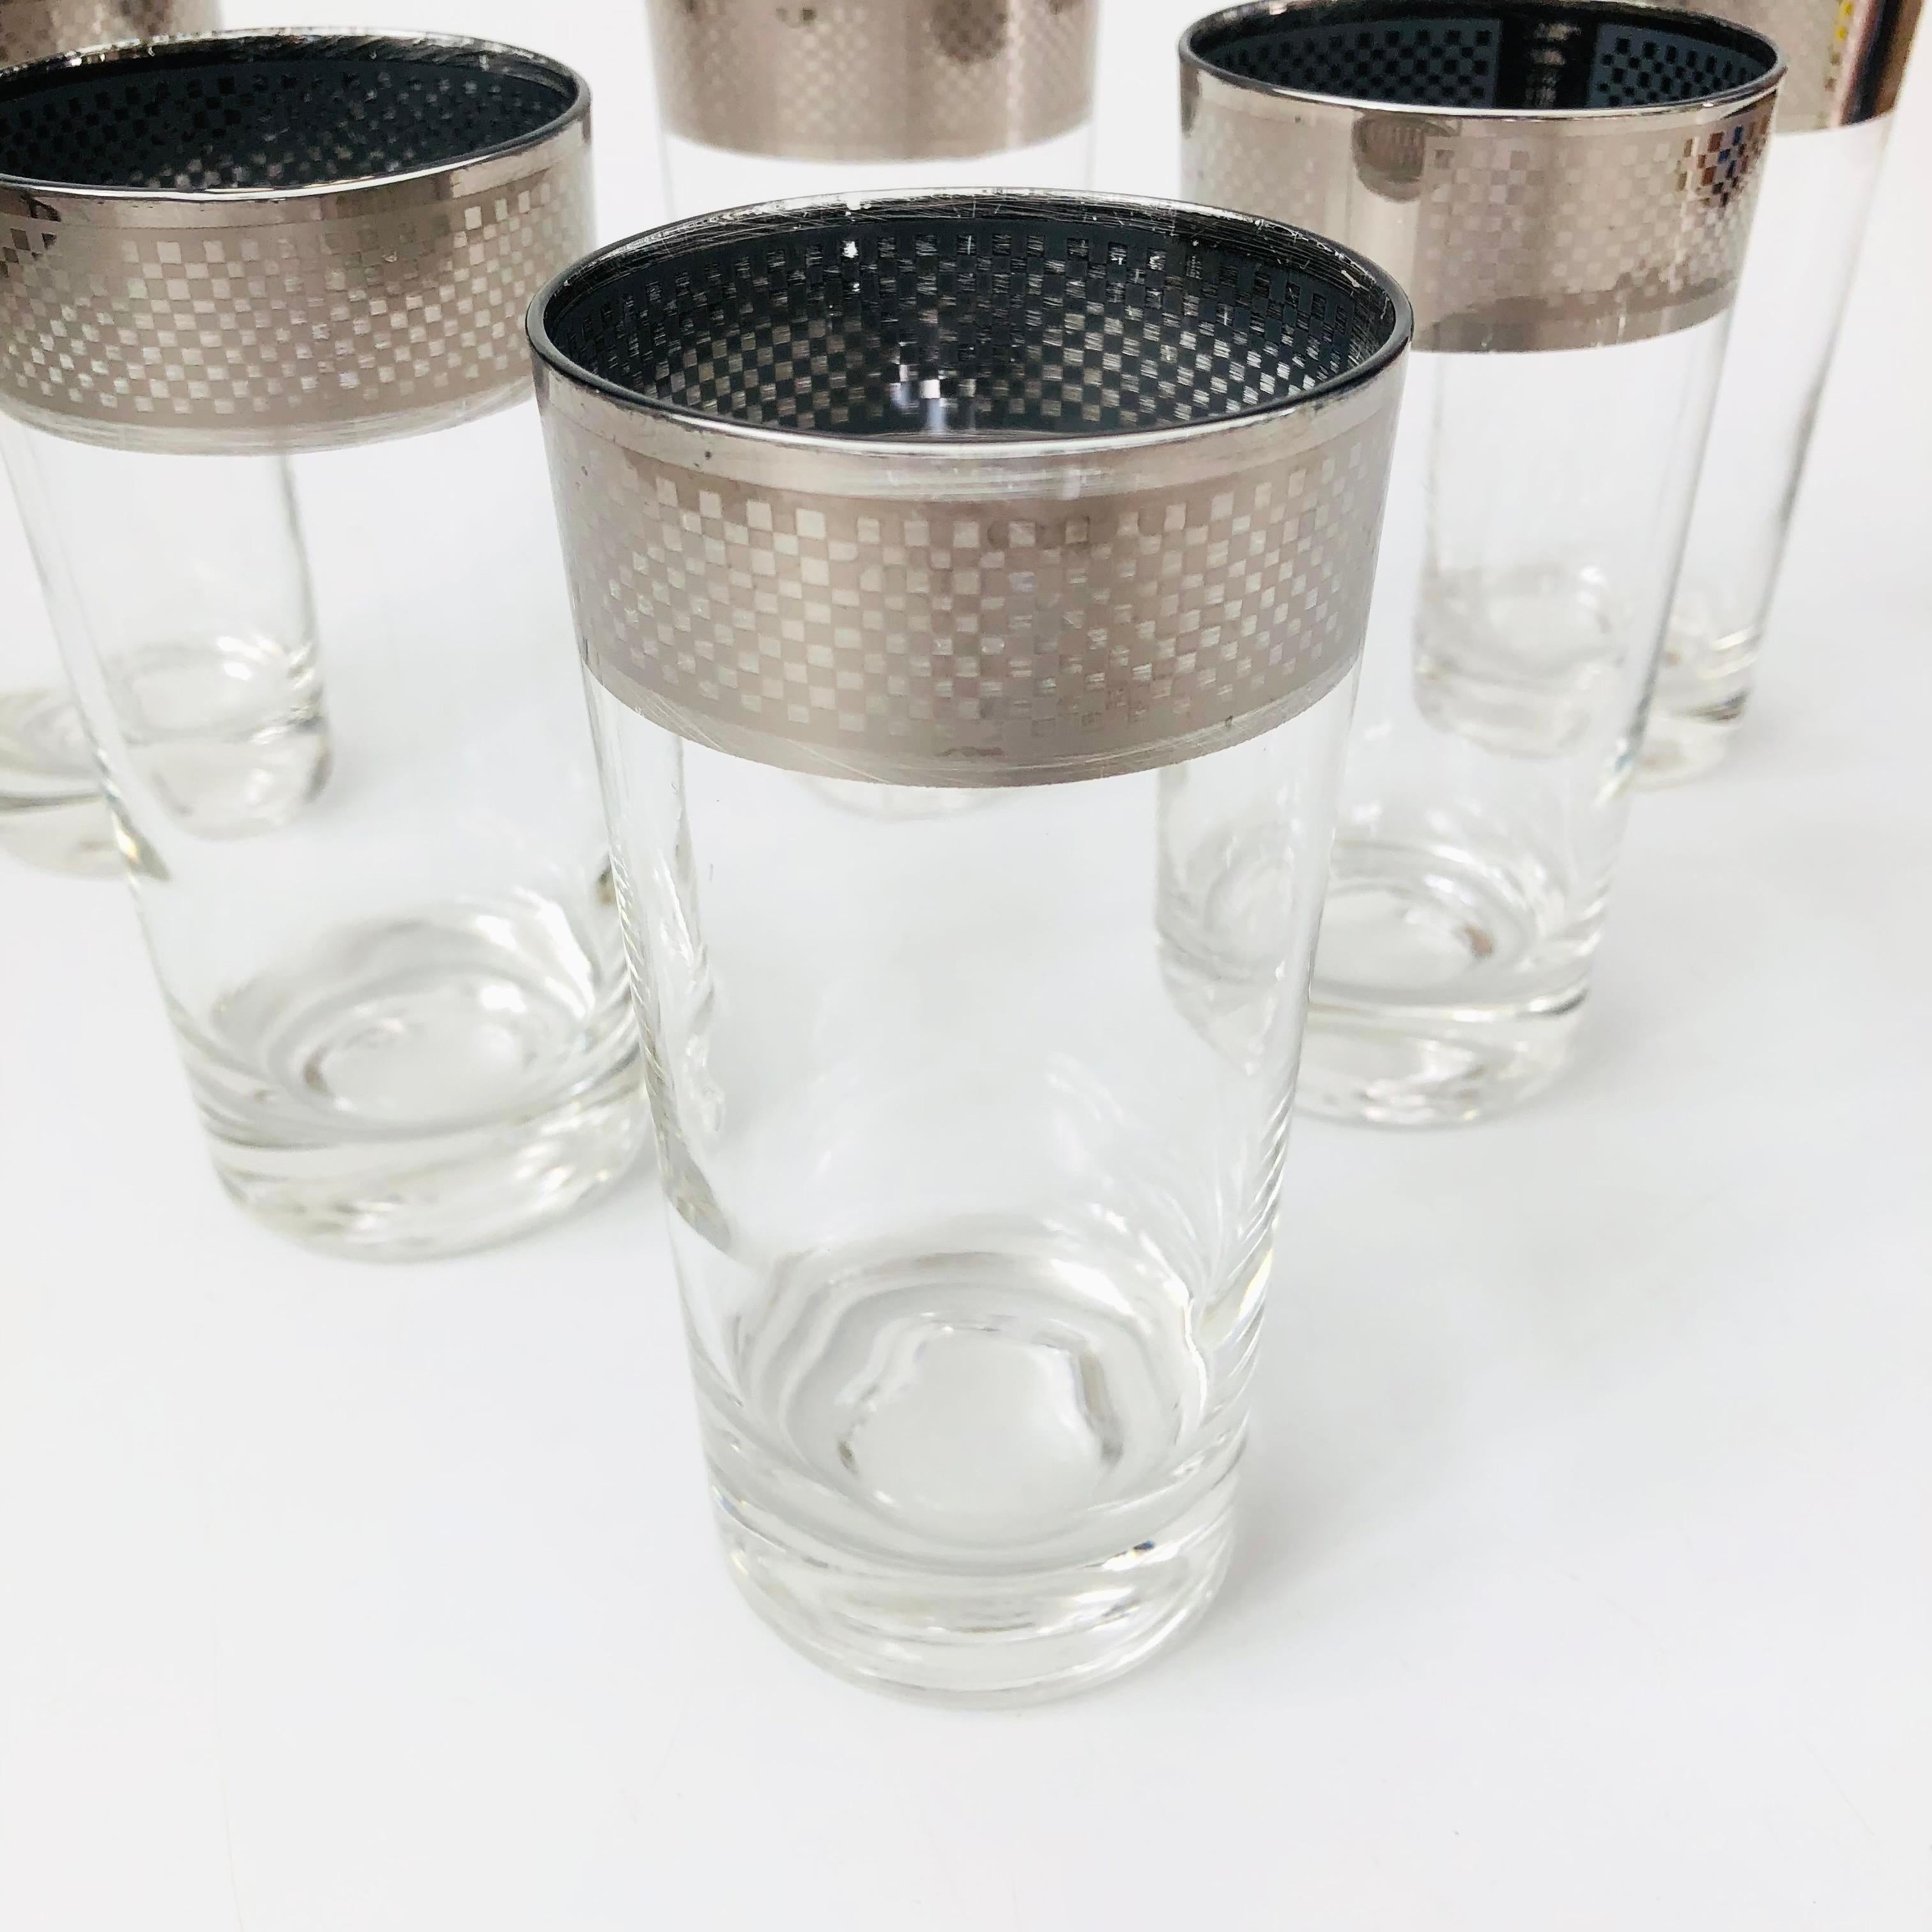 A beautiful set of 6 mid century silver rim tumblers. Unique checkered pattern to the silver rims. Perfect for using as water glasses or for cocktails.

